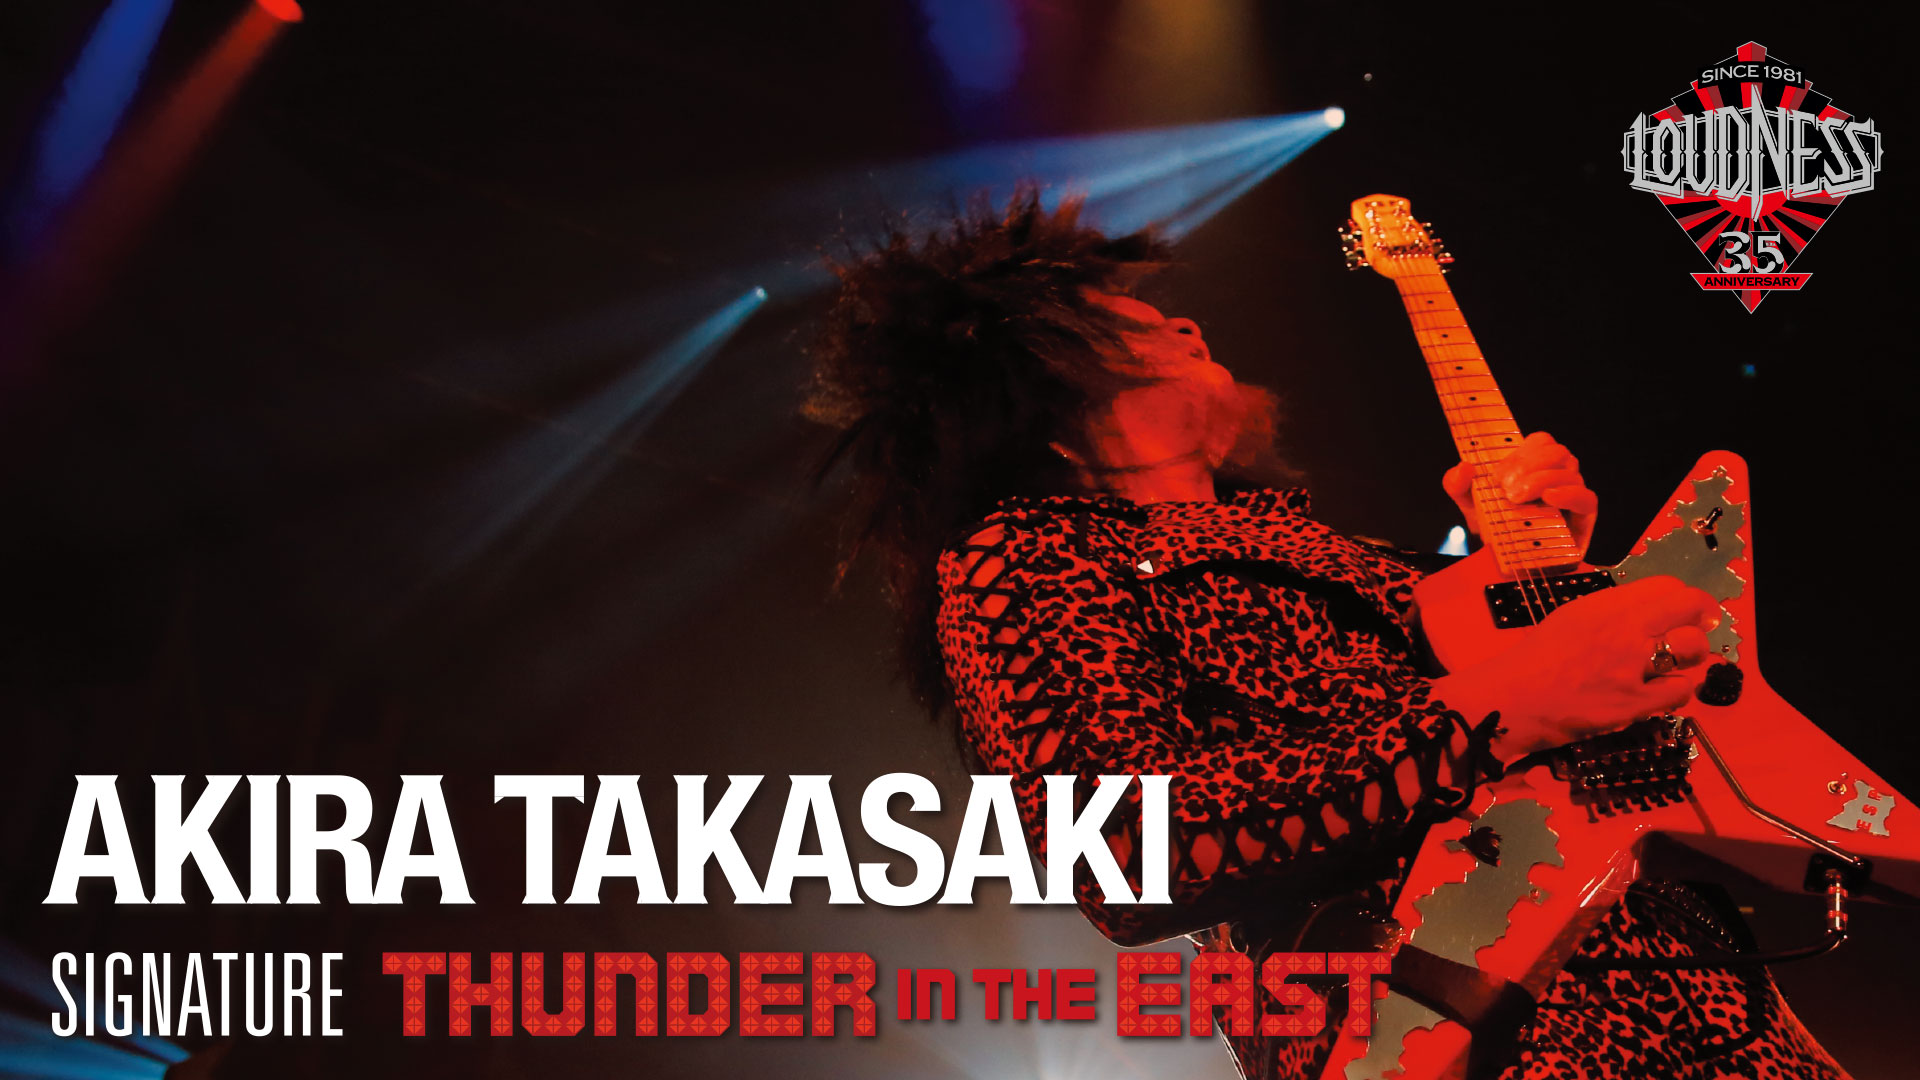 THUNDER IN THE EAST